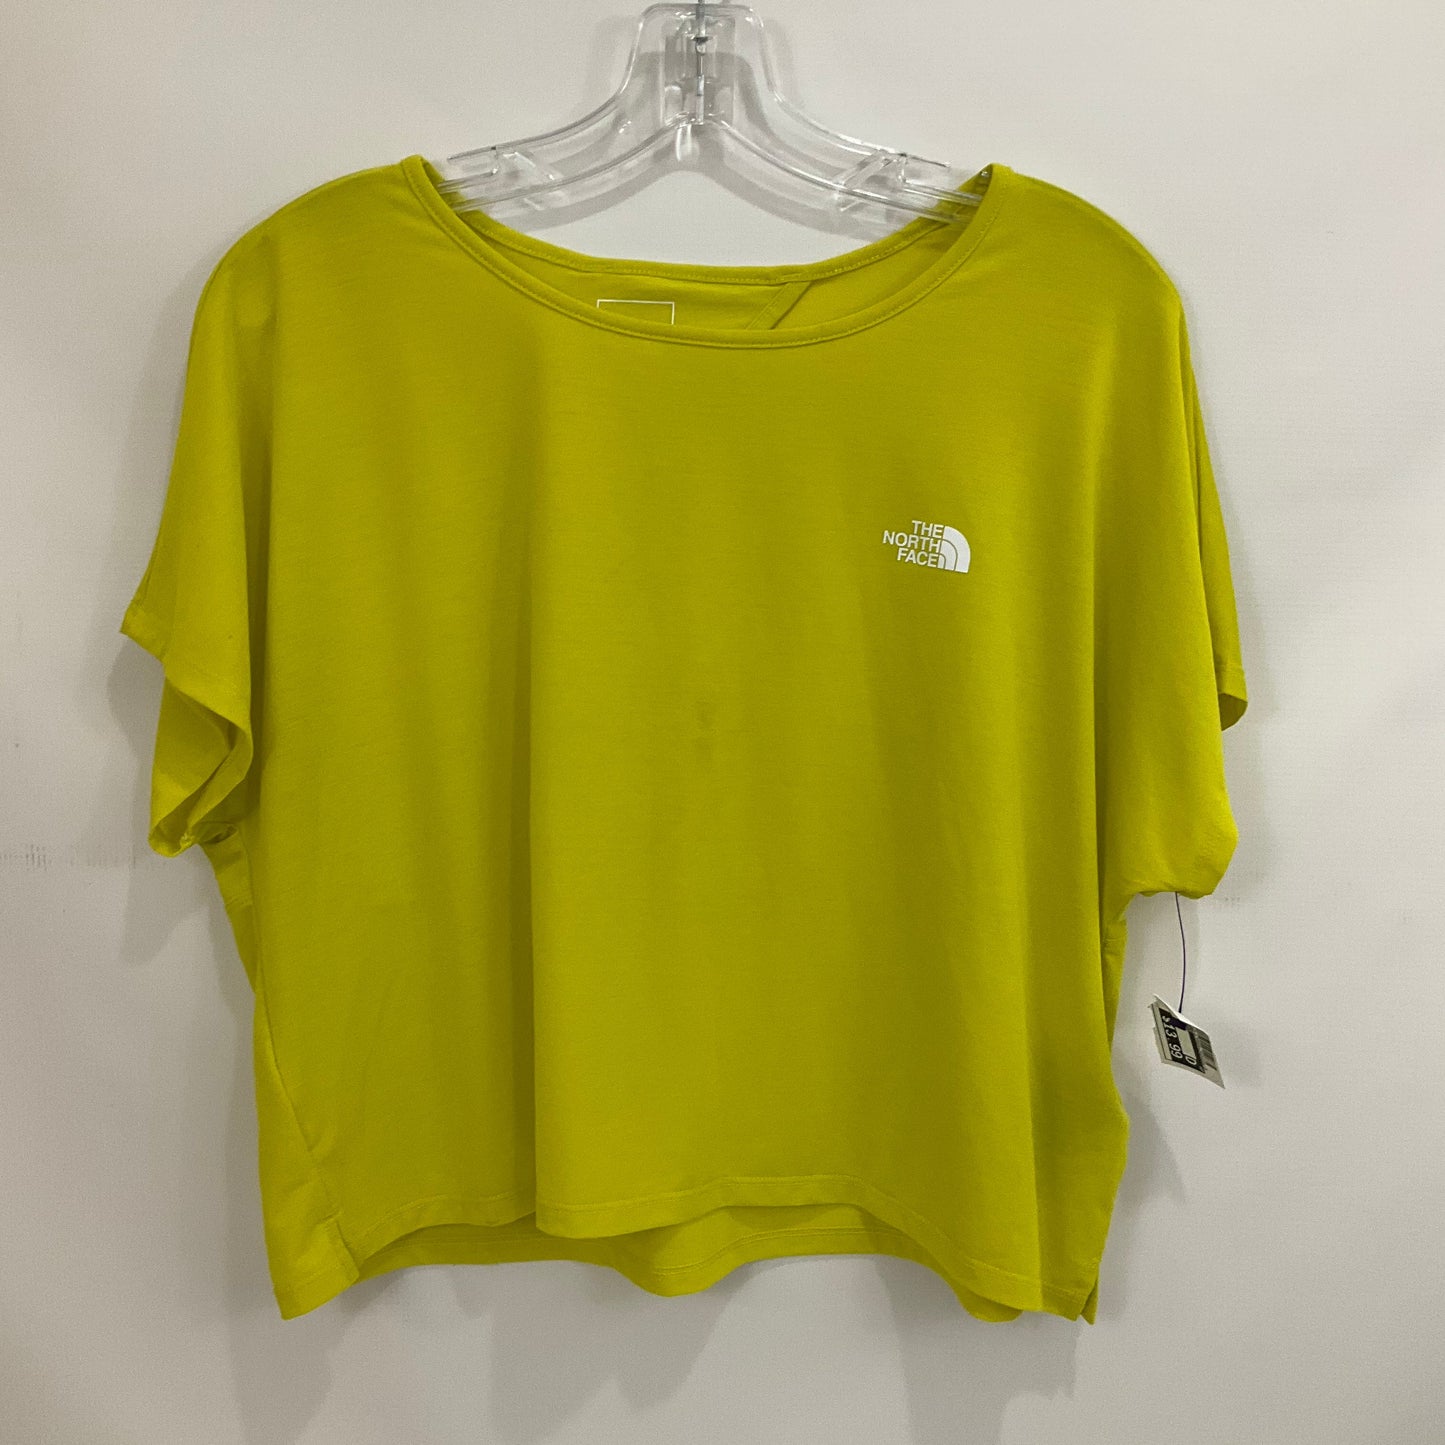 Yellow Athletic Top Short Sleeve The North Face, Size L